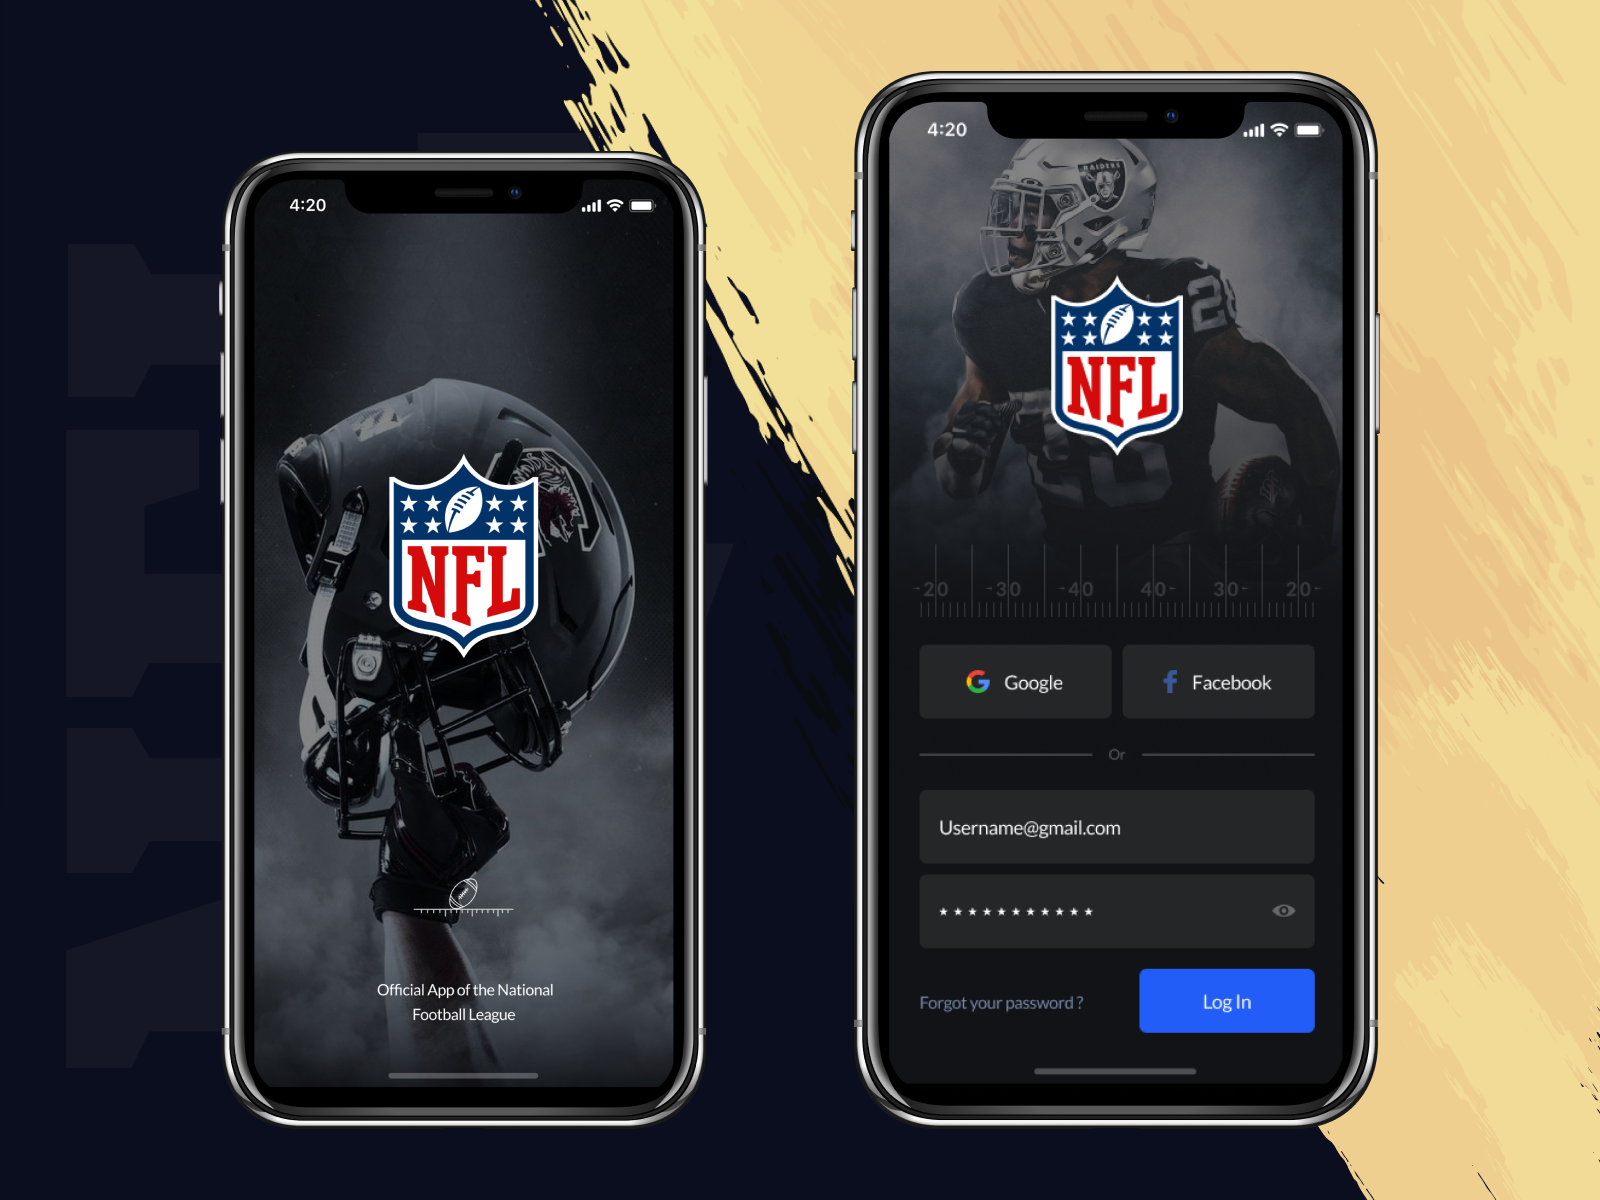 How to Use the NFL Mobile App